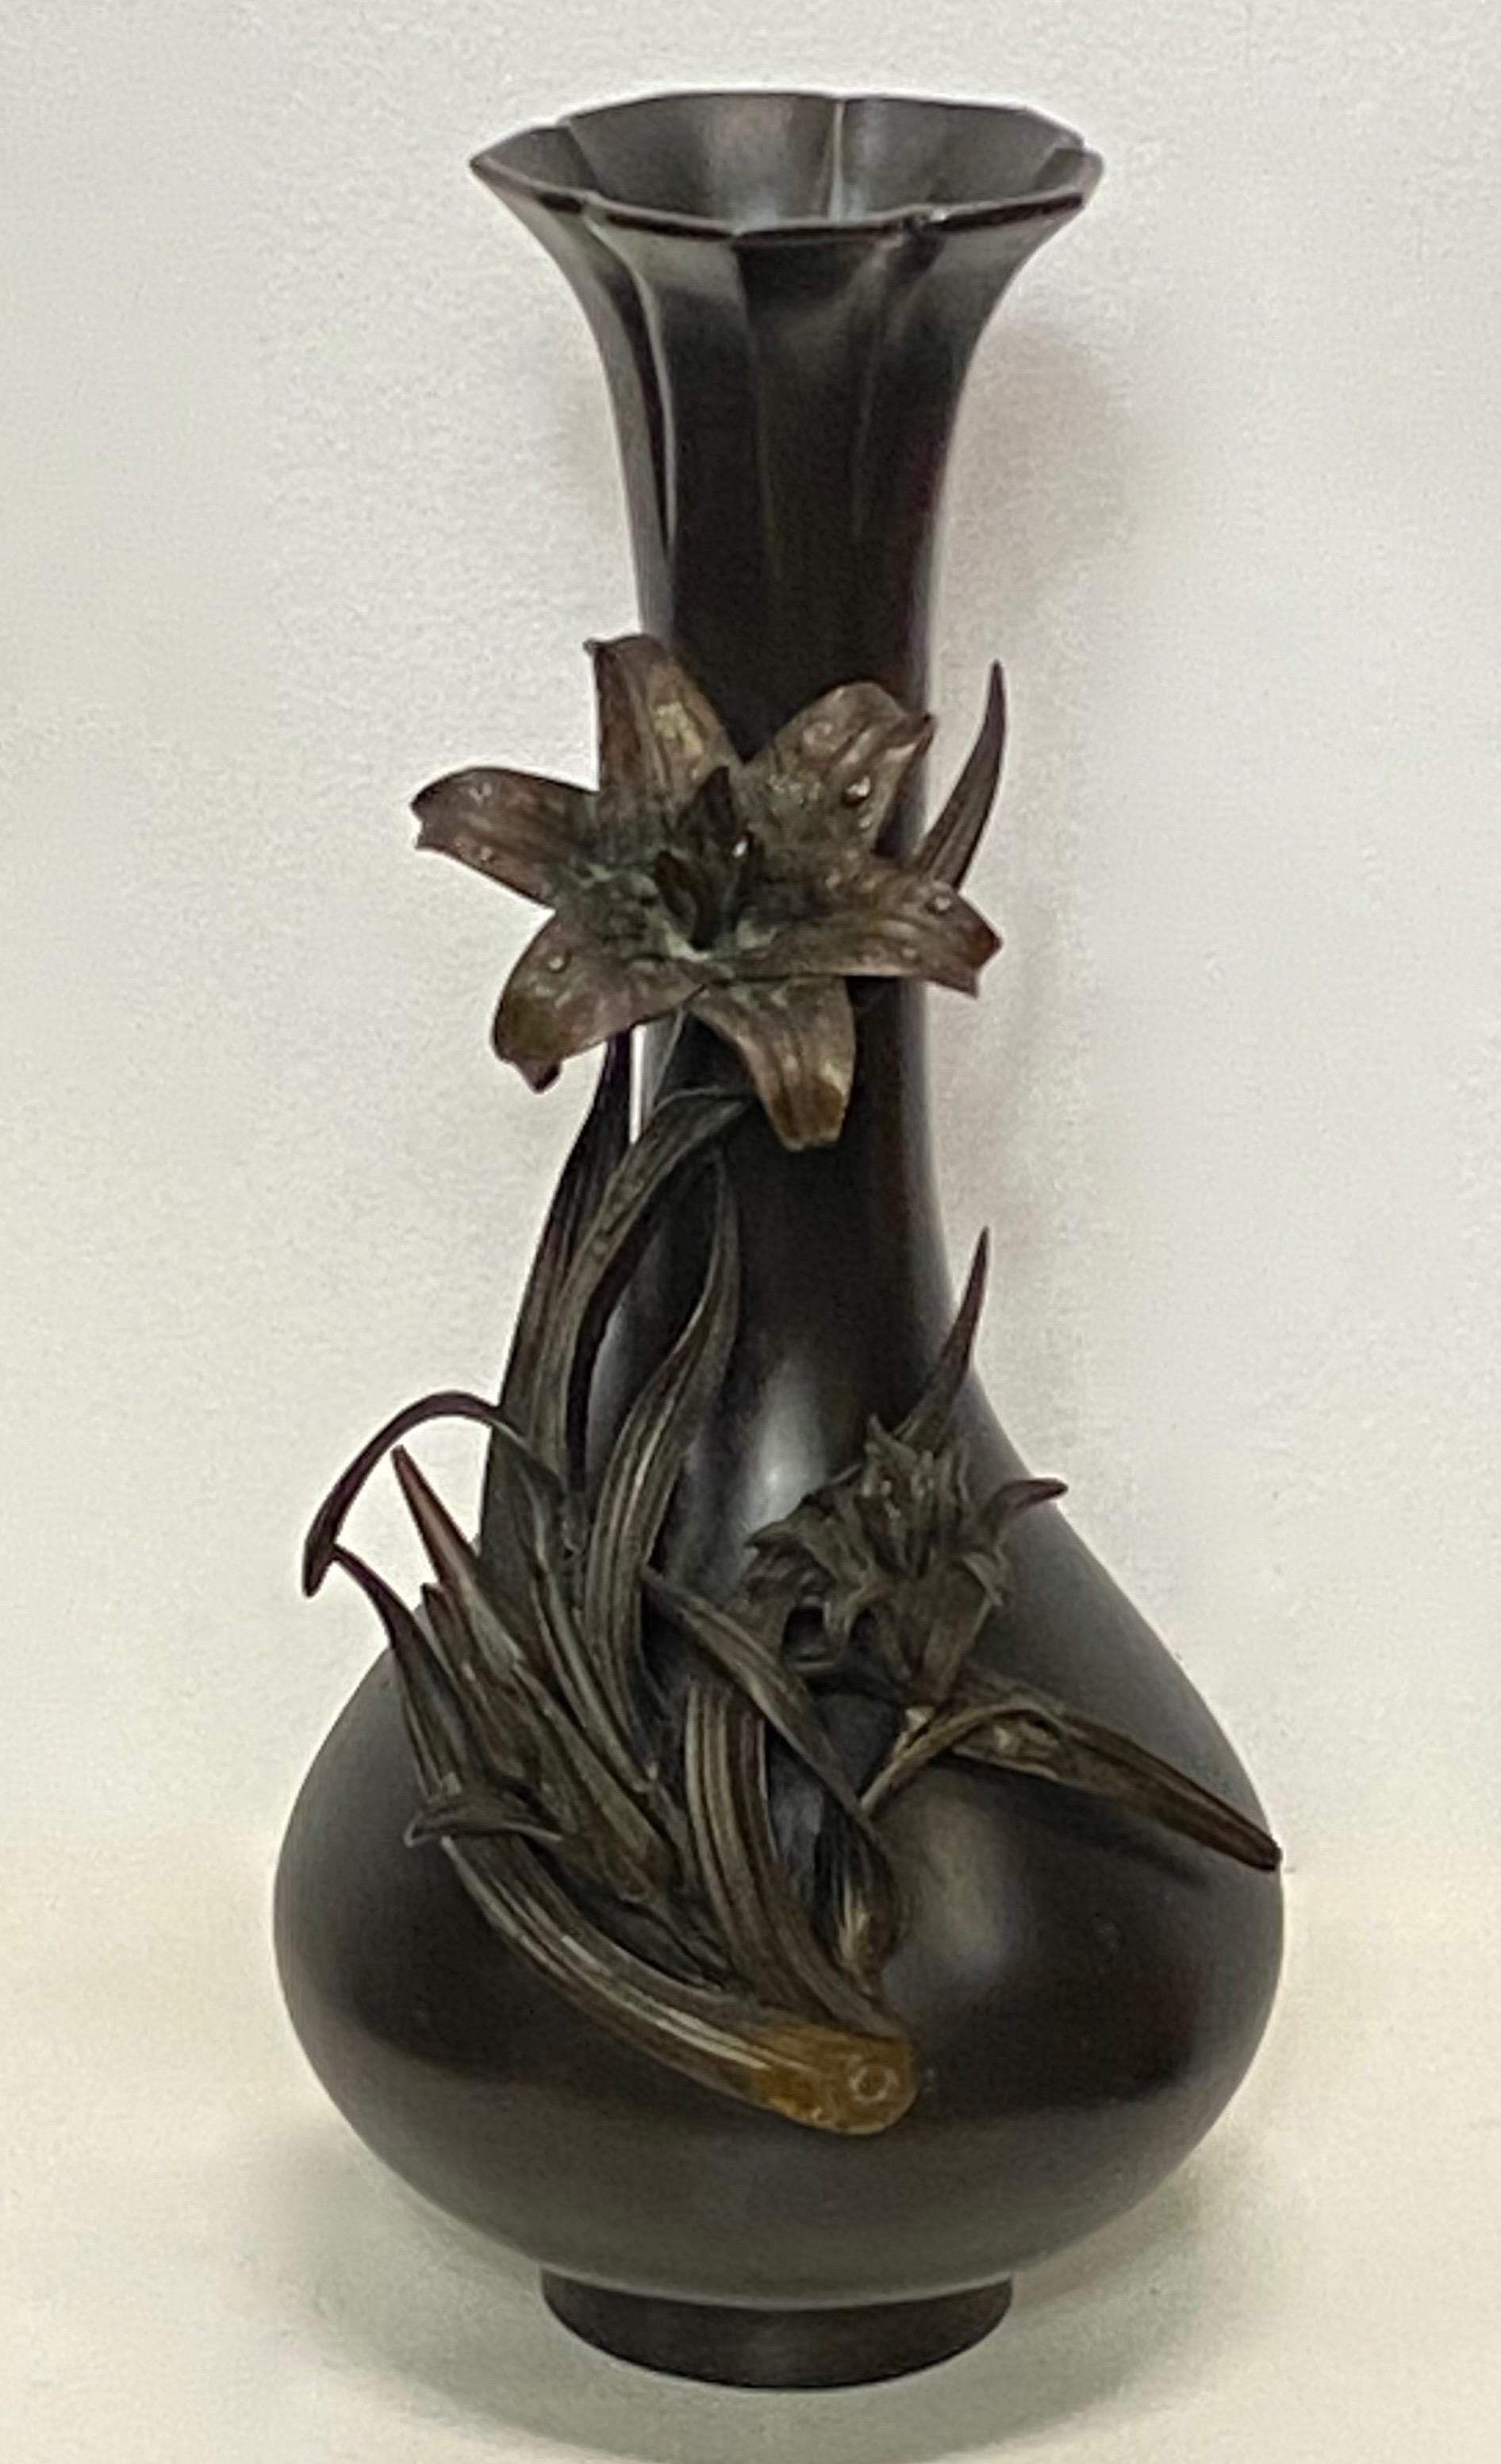 A large and elegant Meiji period bronze vase with floral decoration and original patina, unsigned.
Japan, last quarter of the 19th century.

